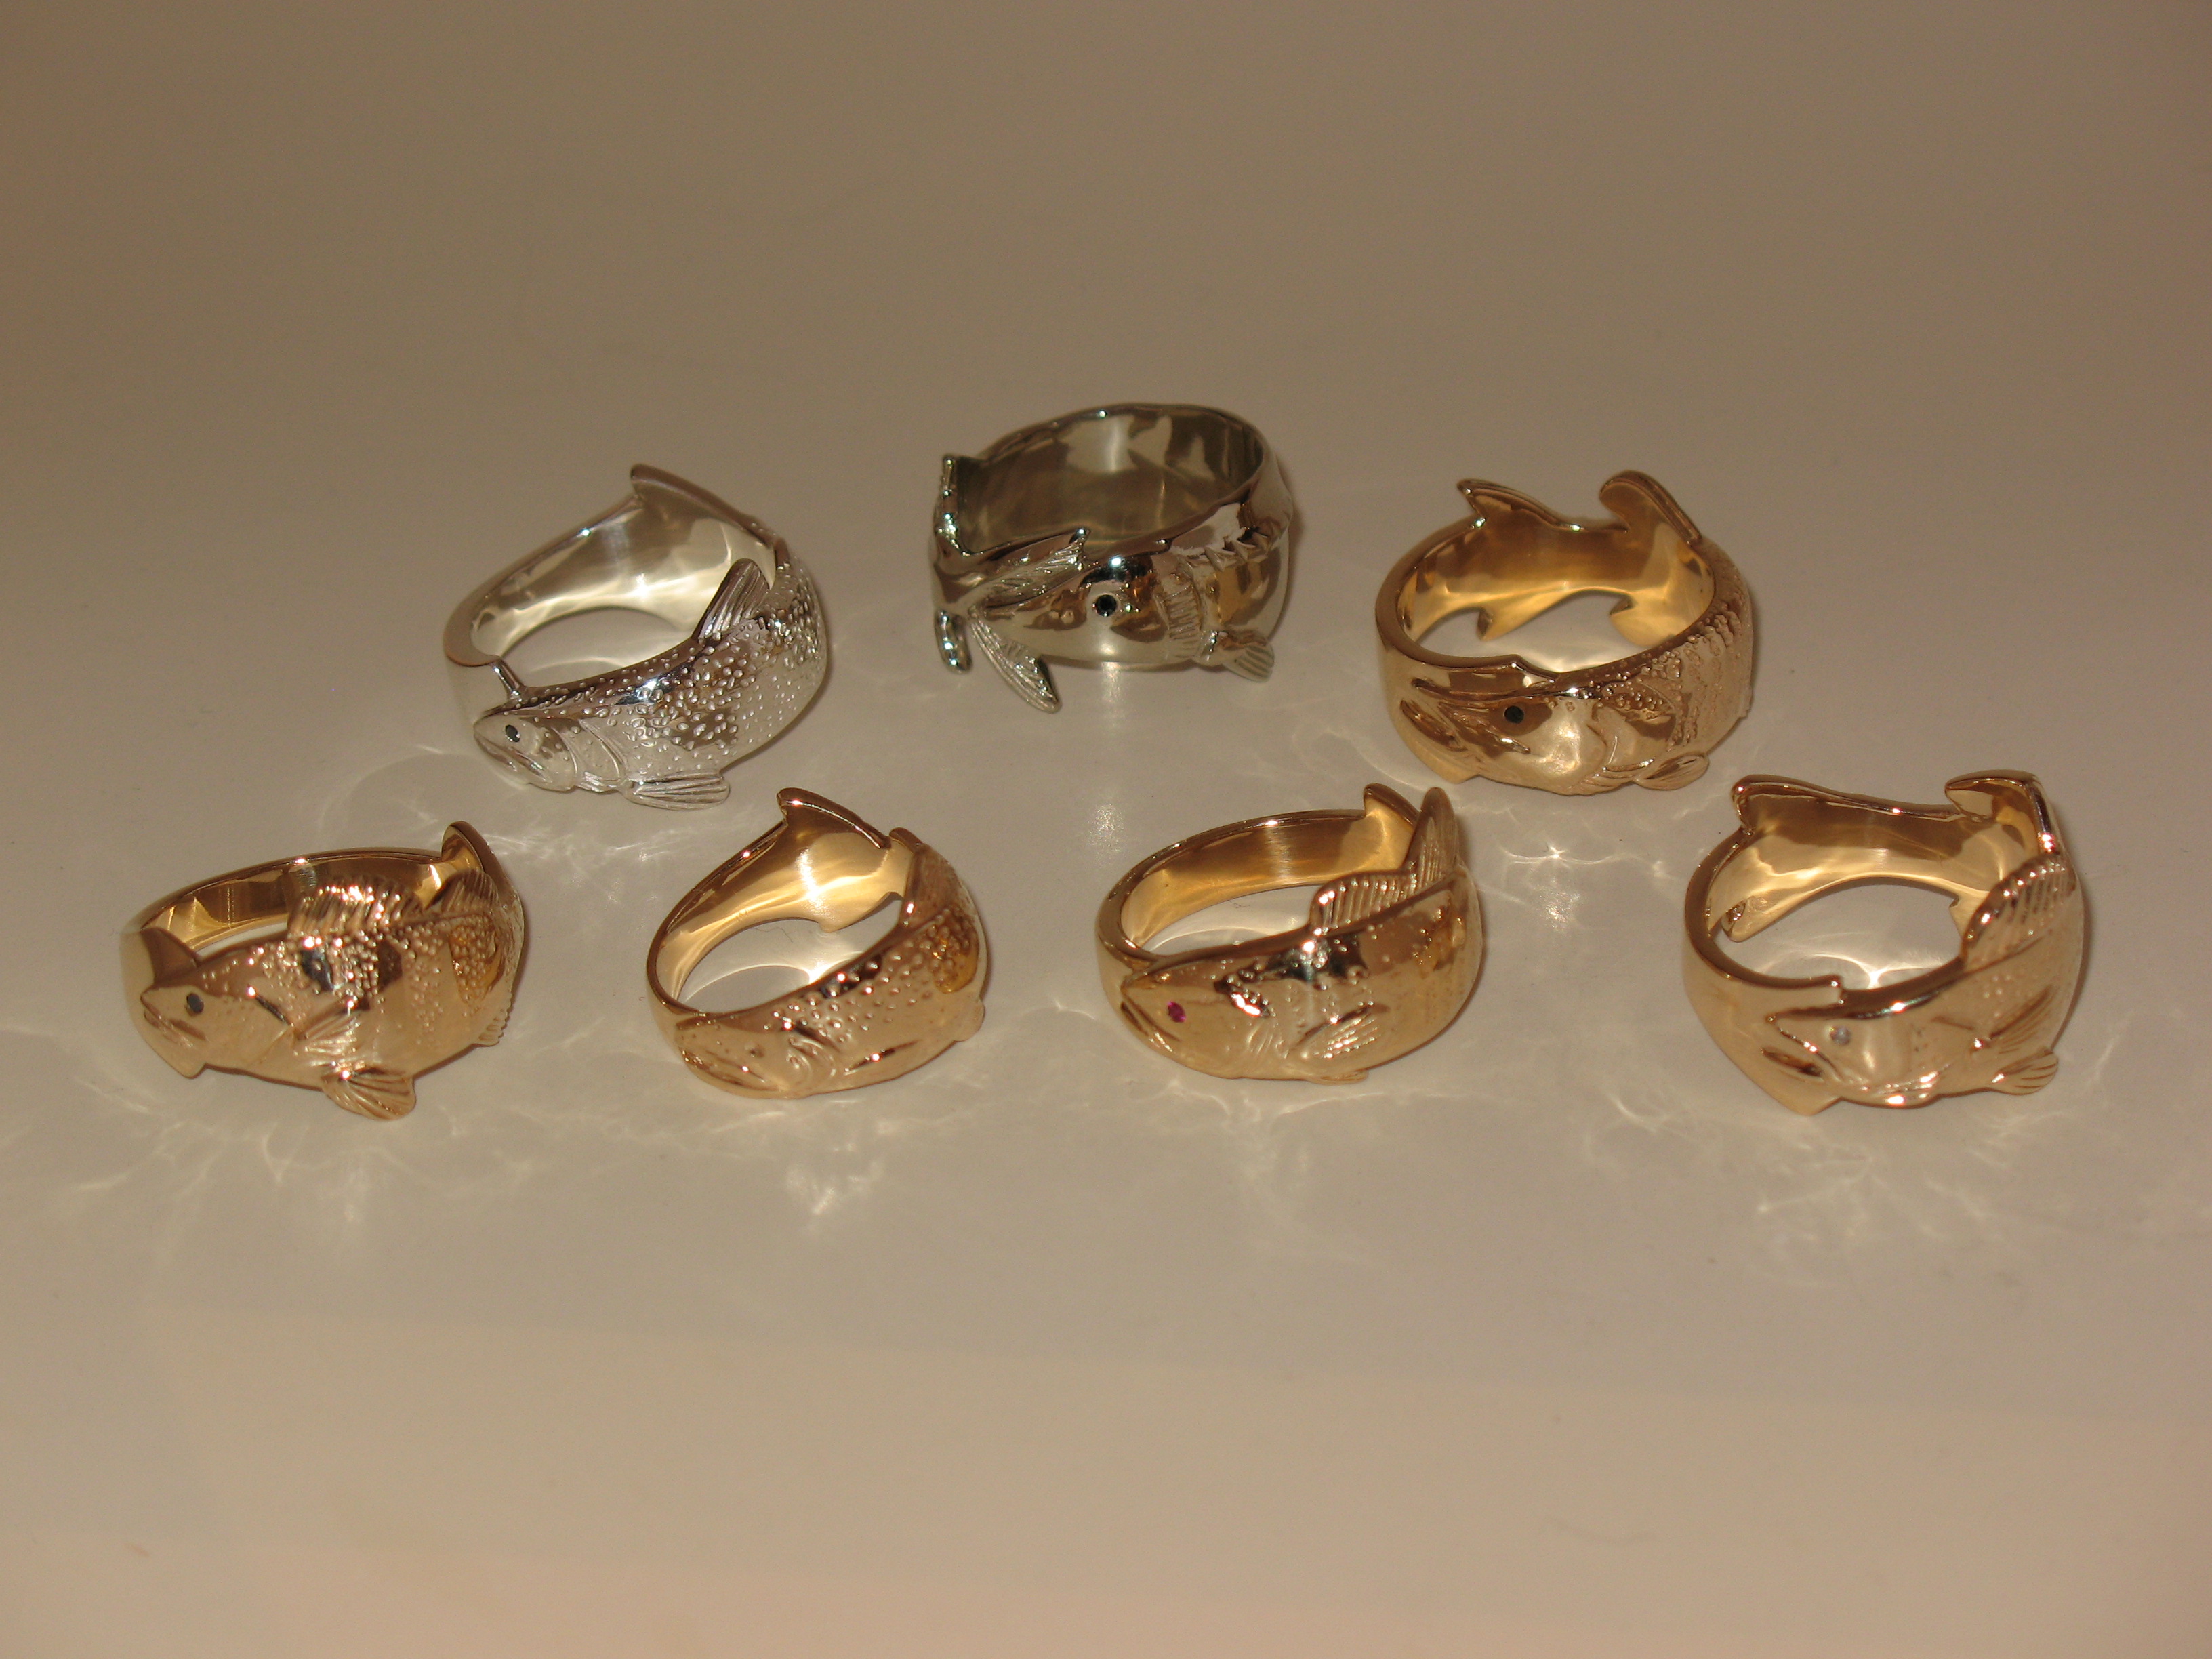 Group Photo of all Trophy Fish Rings